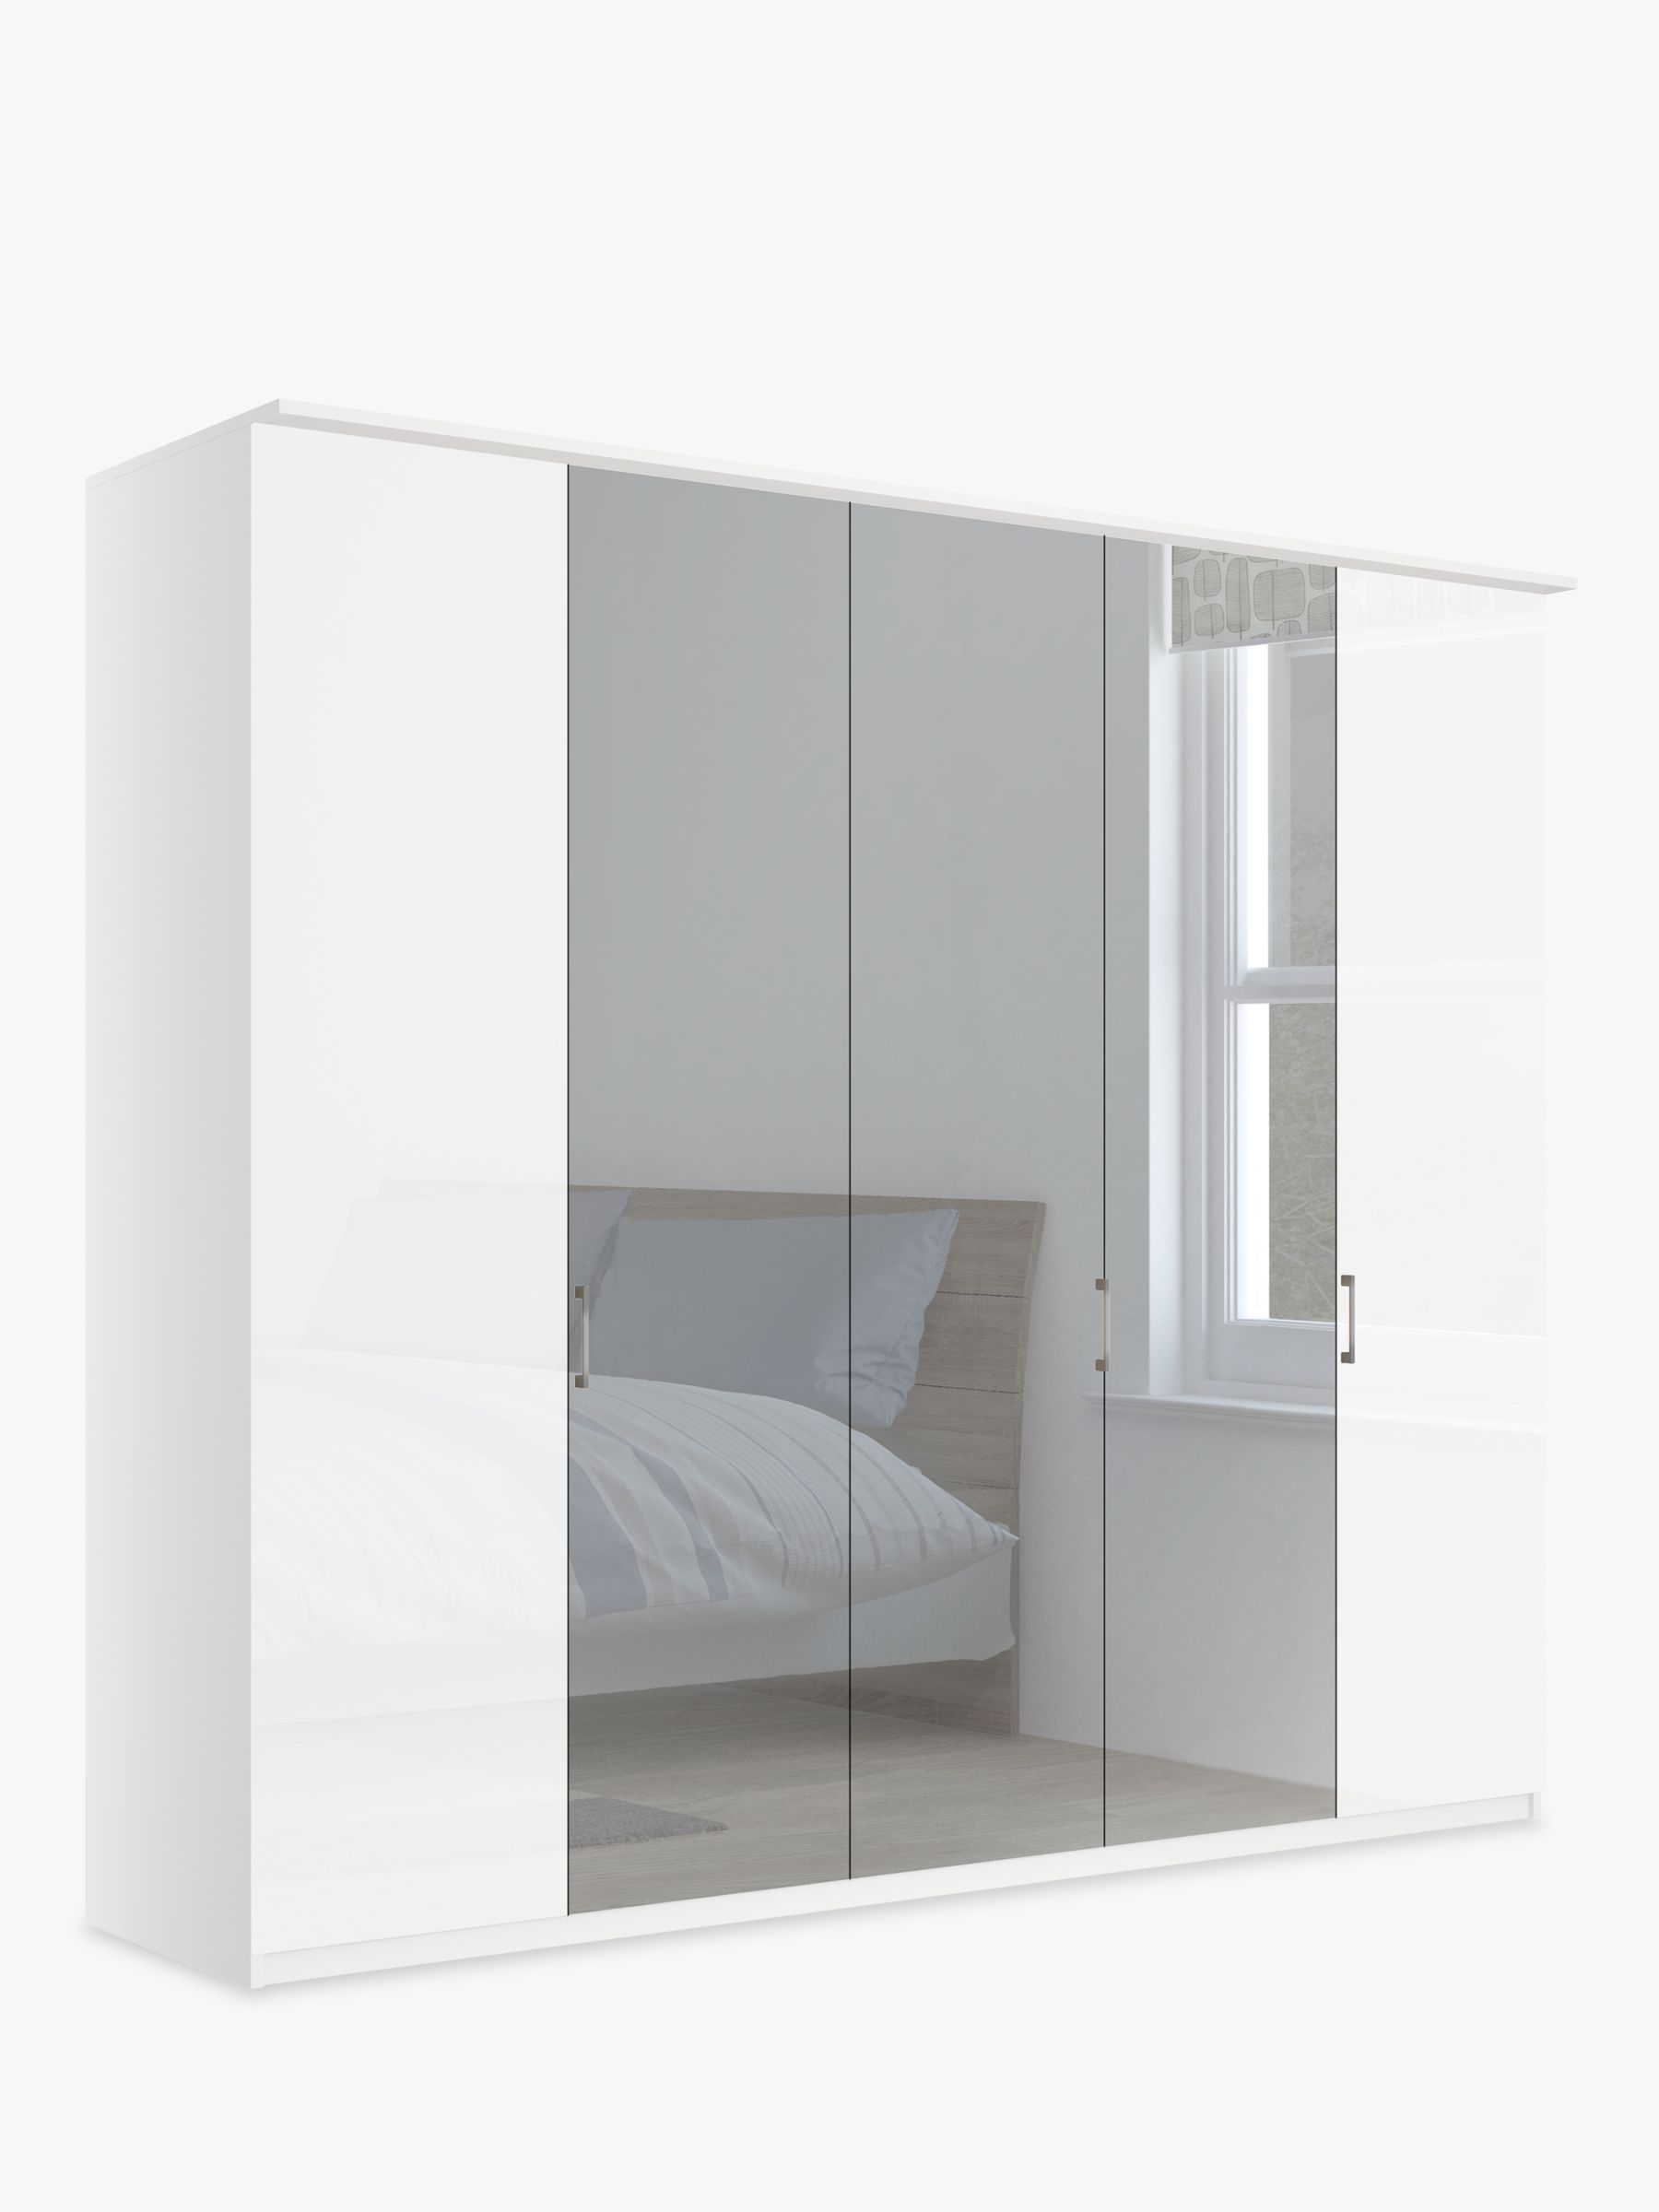 Photo of John lewis elstra 250cm wardrobe with white glass and mirrored hinged doors